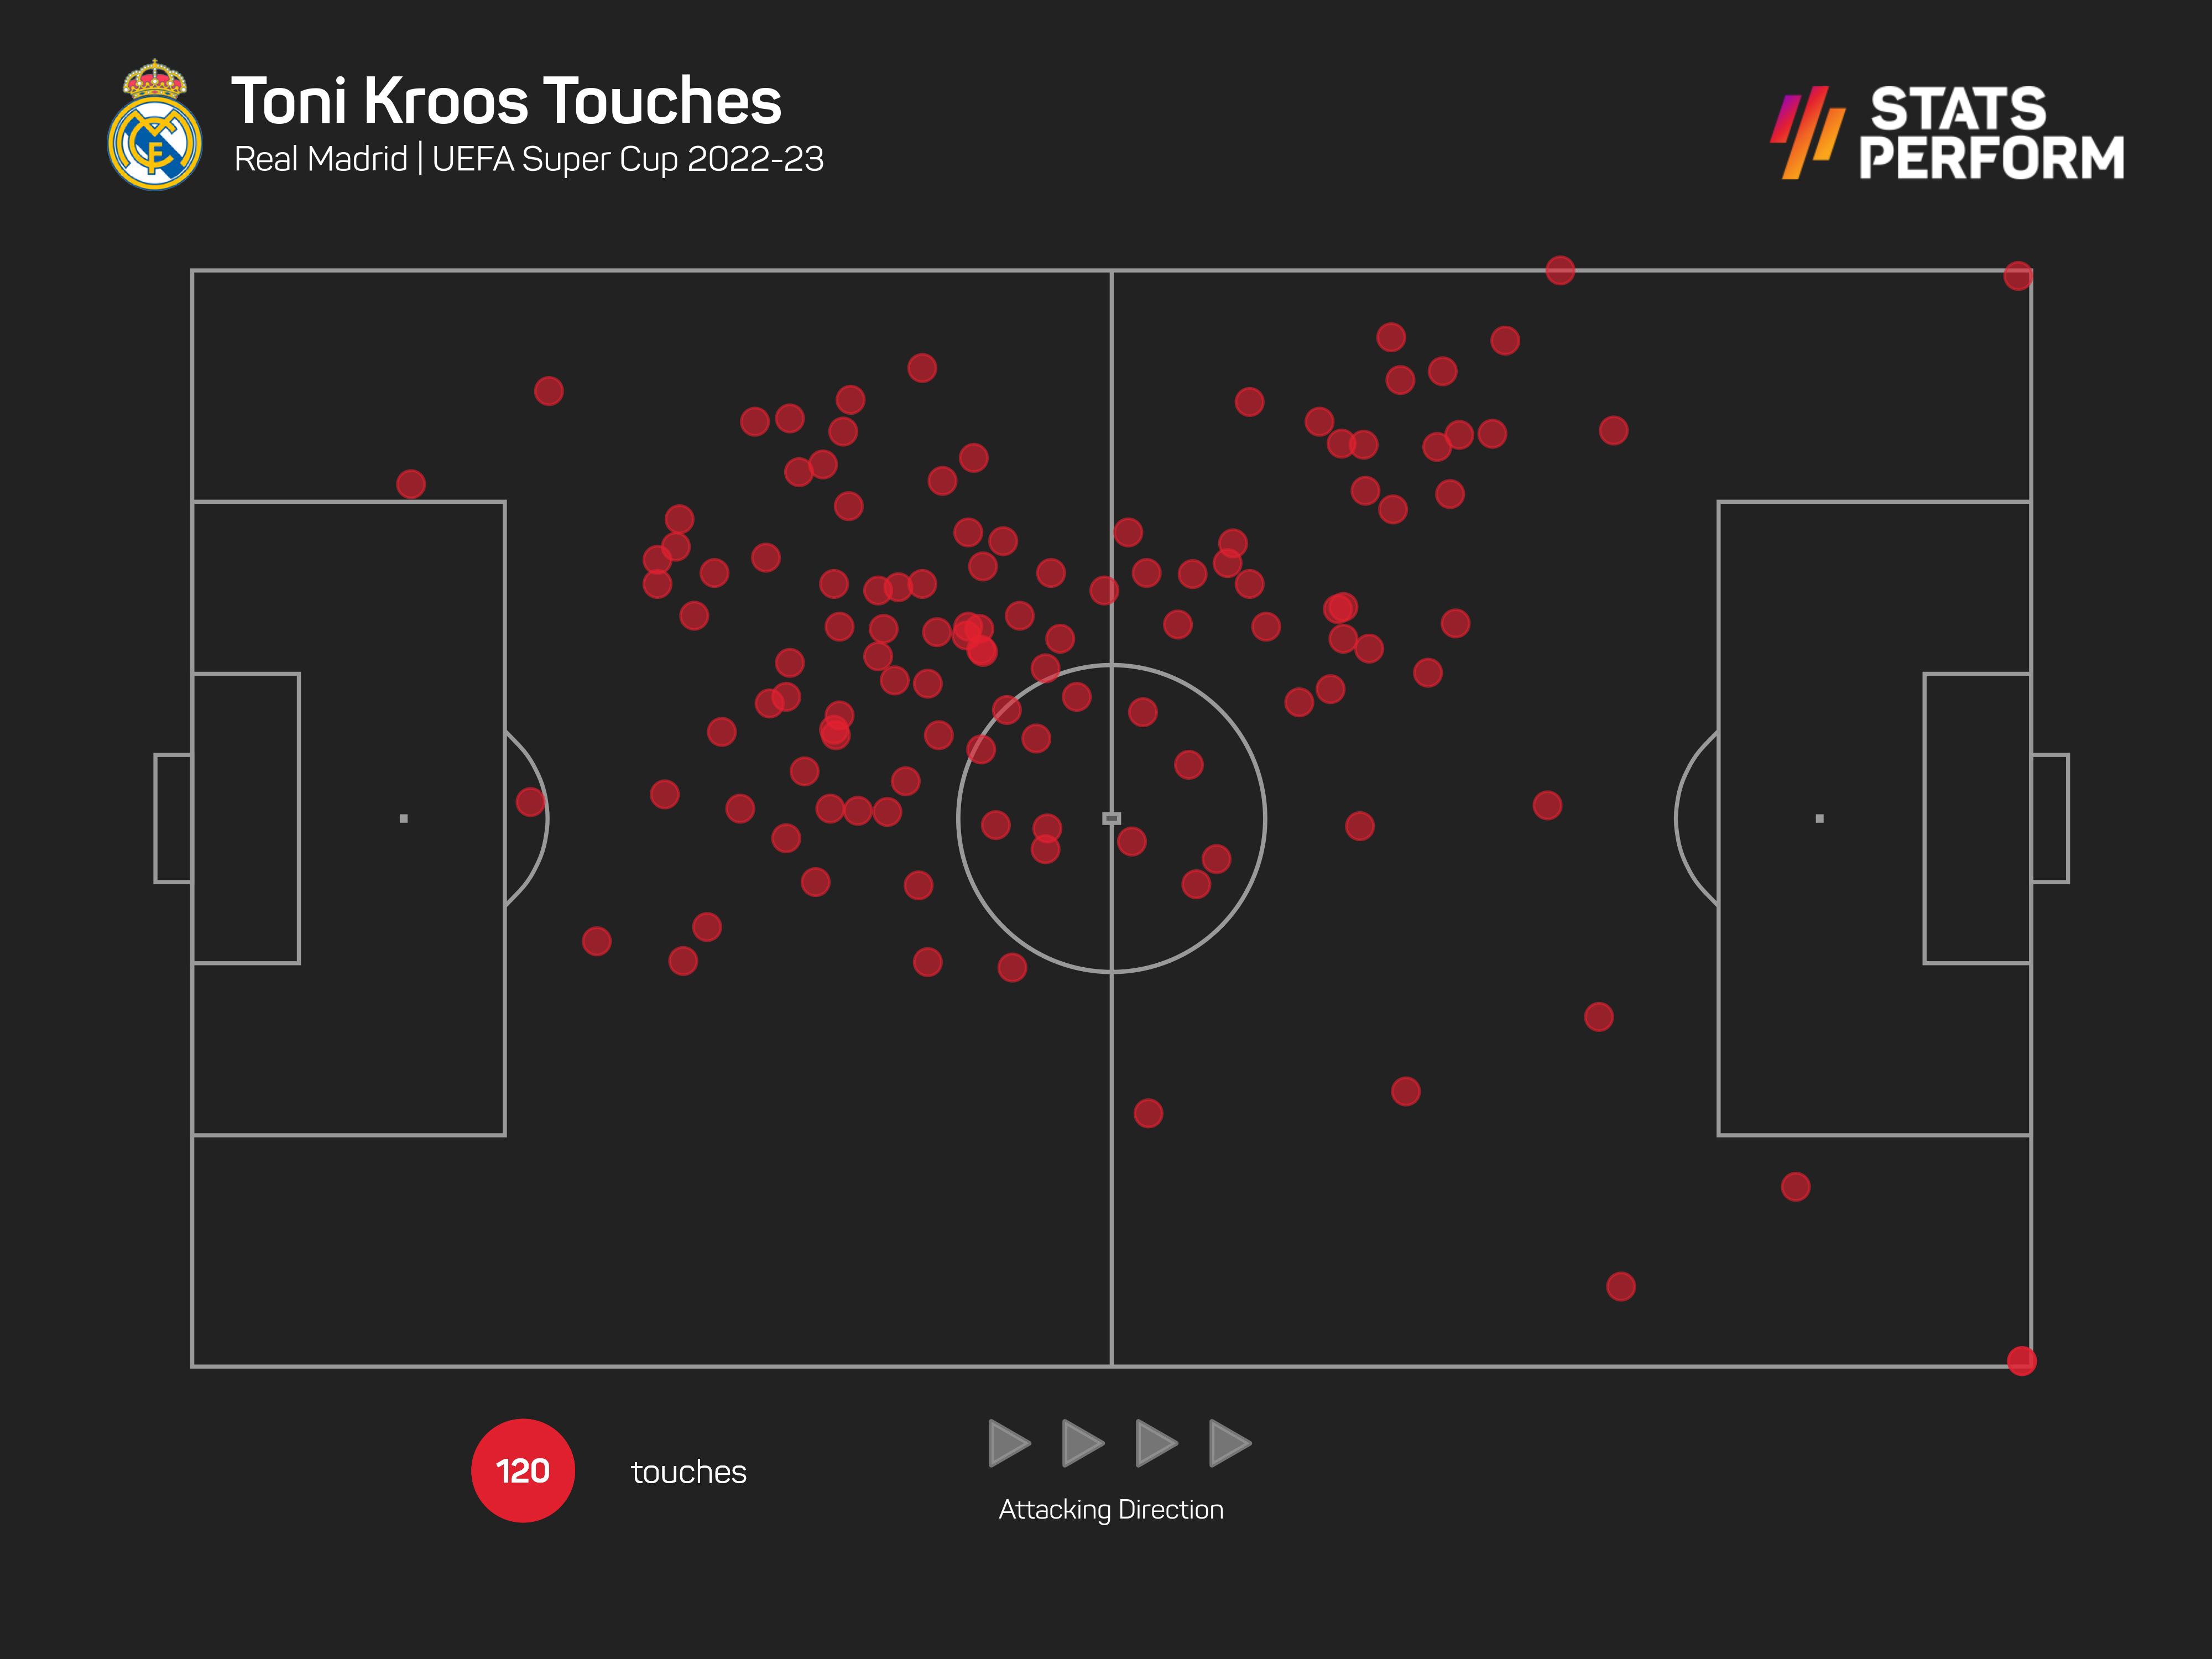 Toni Kroos quietly went about running the show in the Super Cup